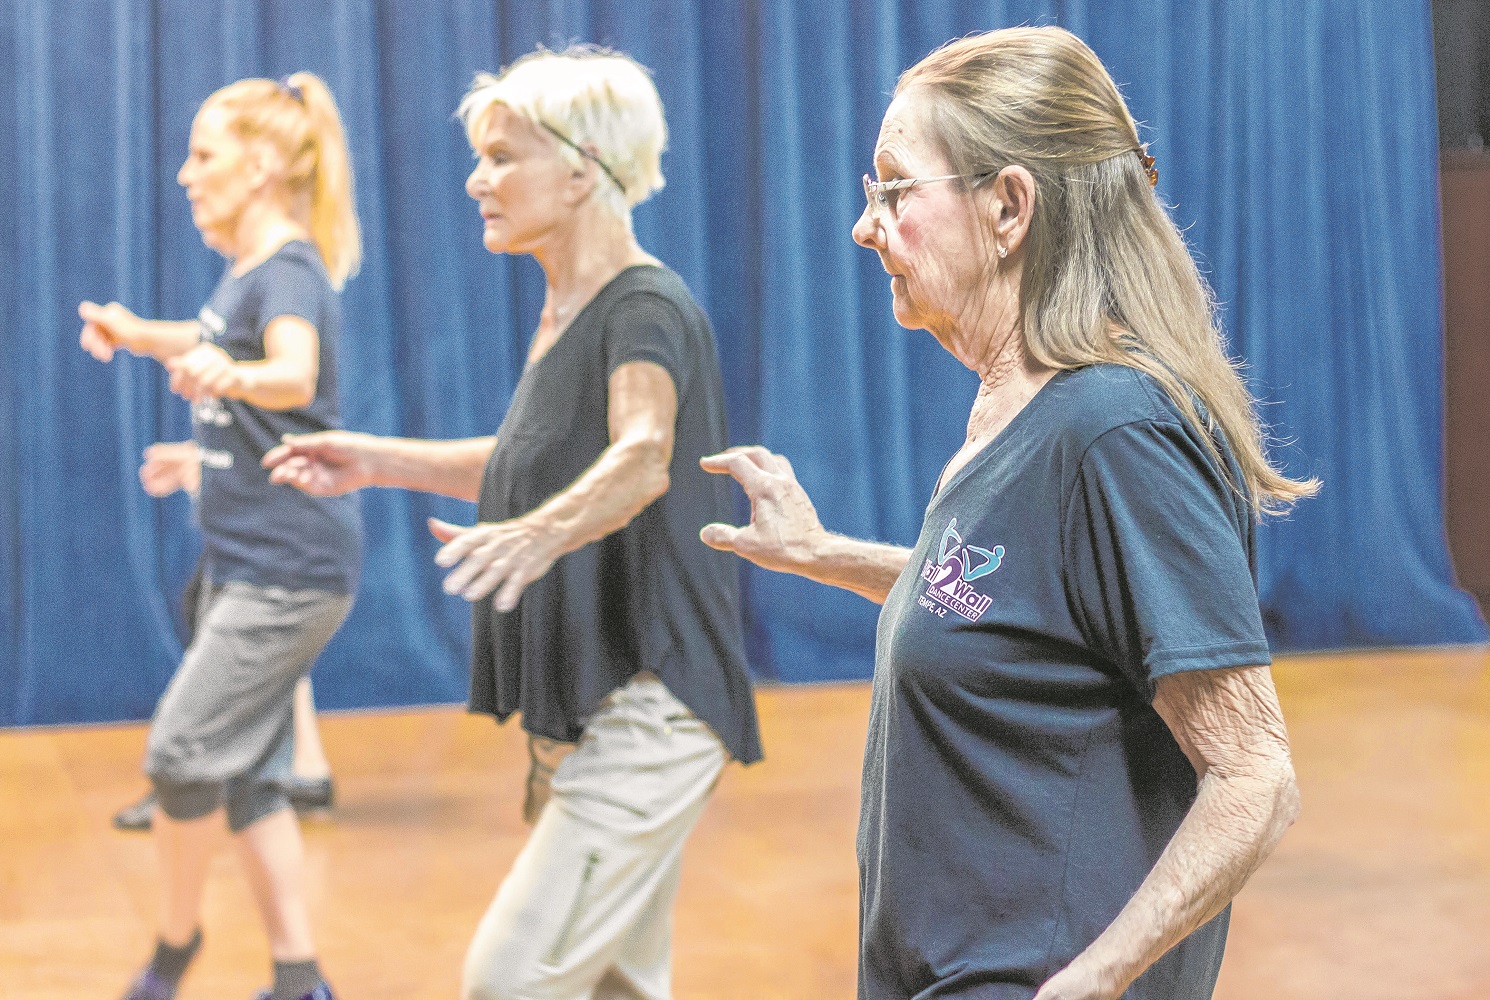 Mary Wall's Tempe studio gives aspiring professionals, as well as those merely conscious of tap dancing's health benefits, a chance to improve their skills and enjoy added mobility, age not withstanding. This year's observance of National Tap Dance Day is coming up May 25. 